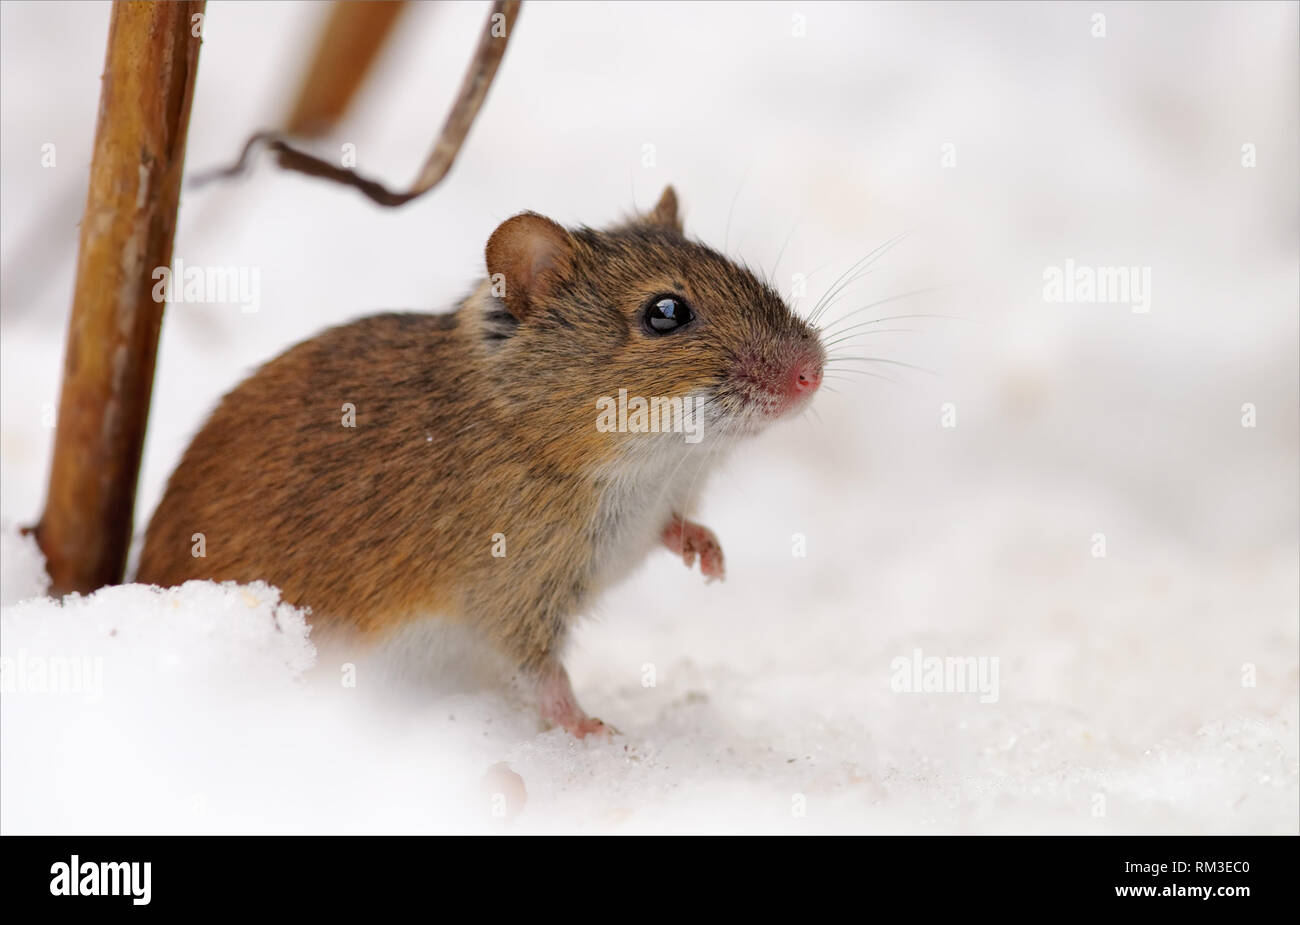 Striped field mouse sits near her hole in the snow in winter season with lifted paw Stock Photo